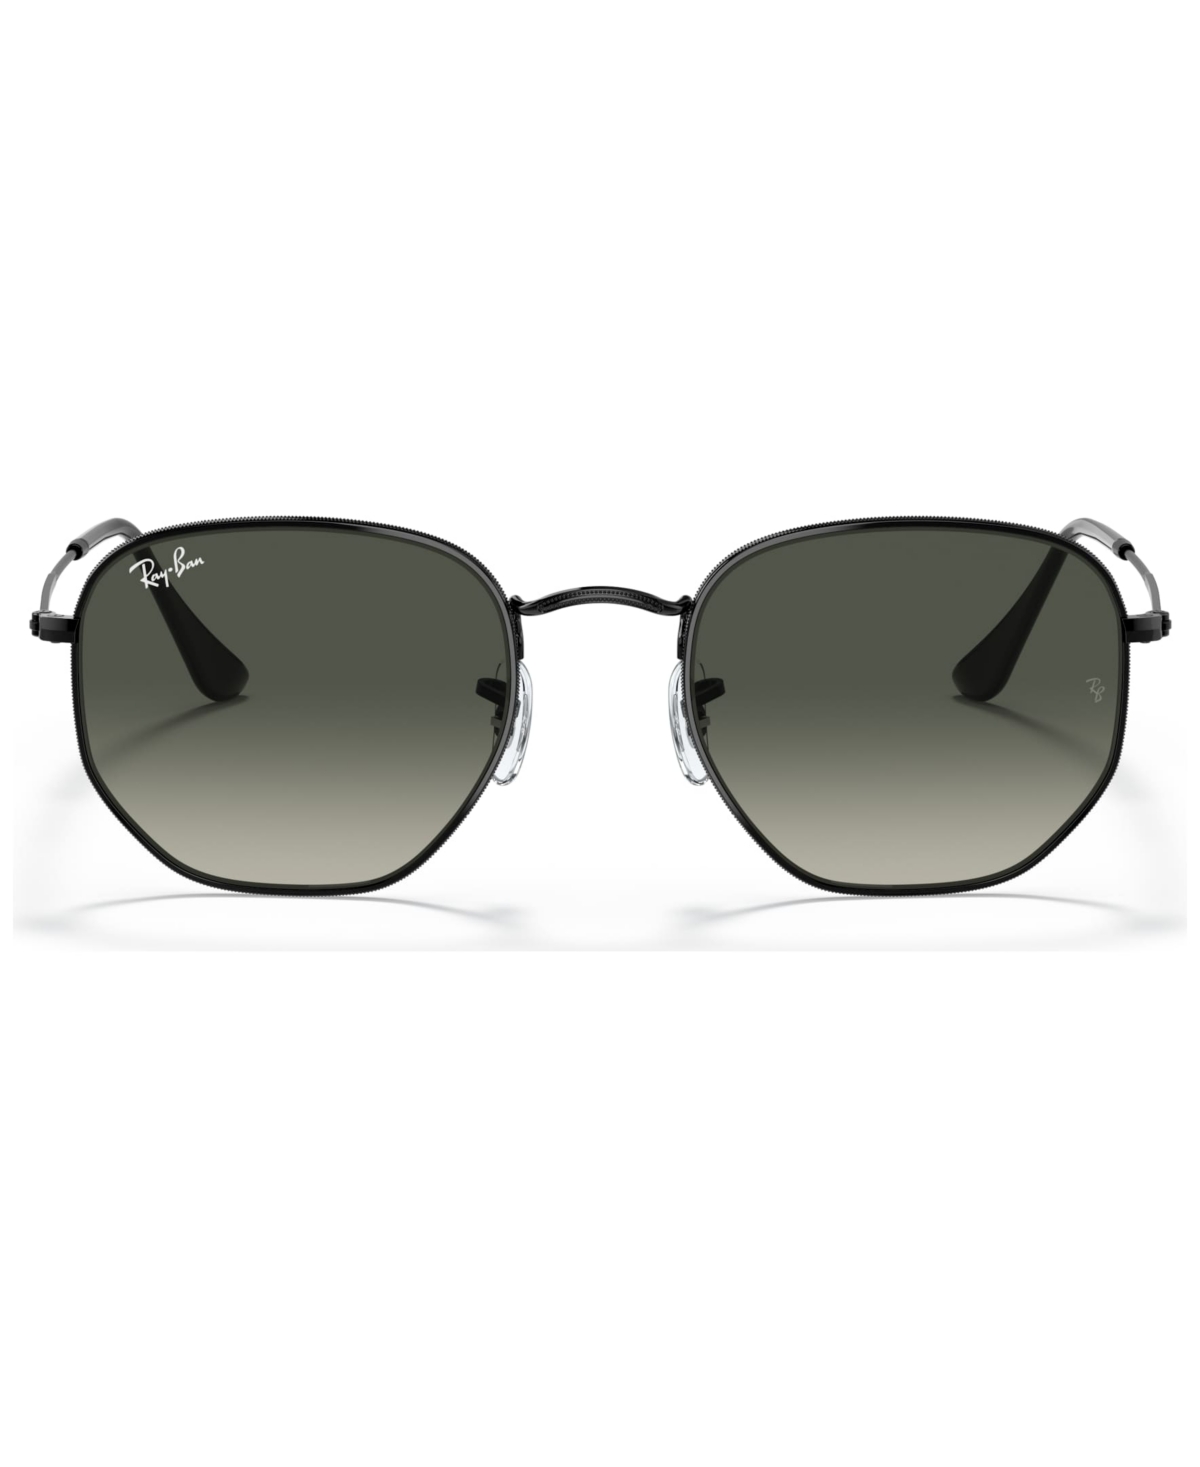 Ray Ban Unisex Sunglasses, Rb3548 51 In Black,grey Gradient